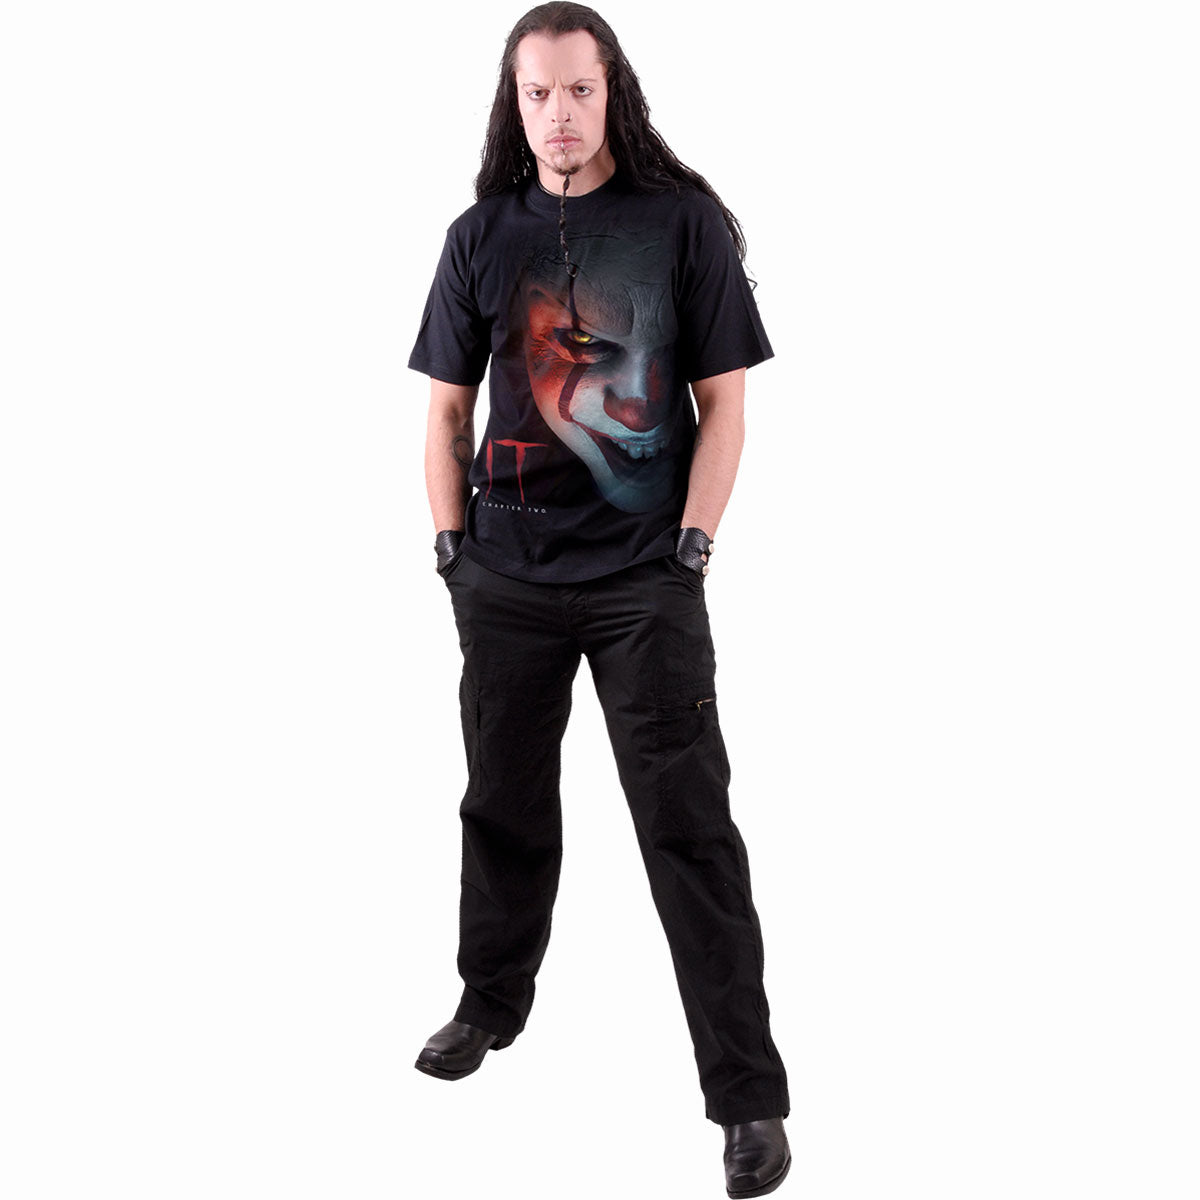 IT - PENNYWISE - T-Shirt Black